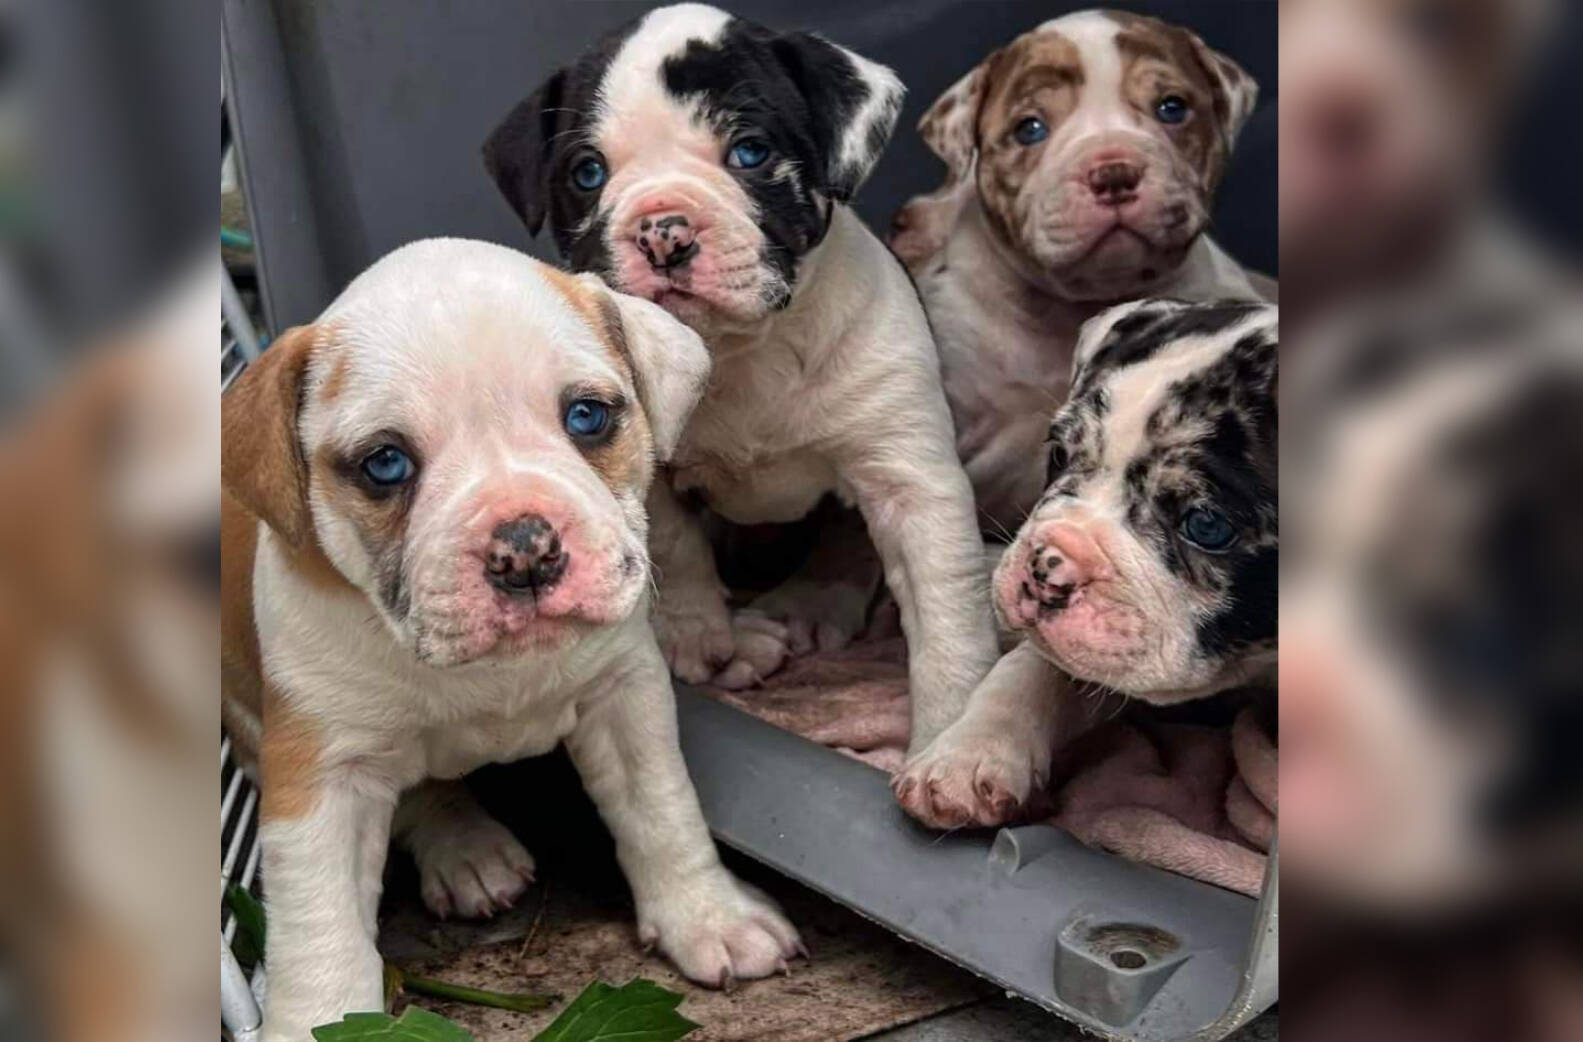 Eight rare-breed Alapaha puppies were stolen from the Kamloops home of a dog breeder shortly after her unexpected death, and her Chilliwack-based sister has vowed to not give up until the dogs are returned. (submitted photo)